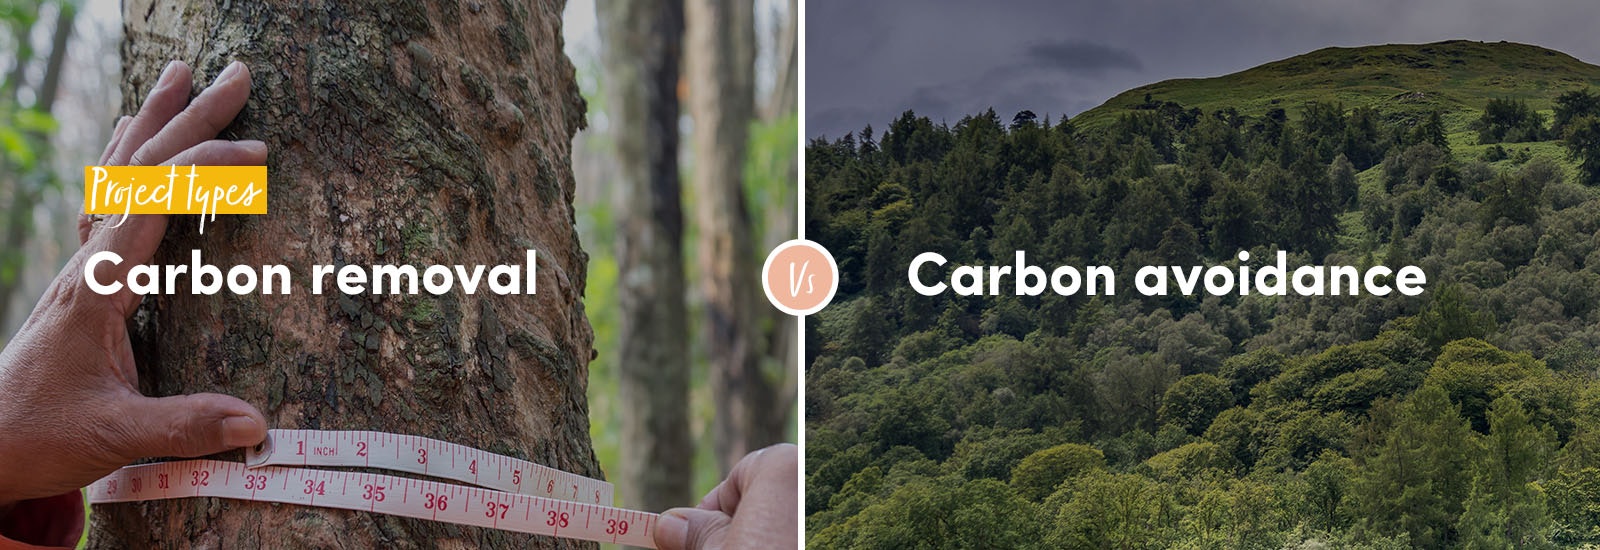 Project types - carbon removal vs carbon avoidance